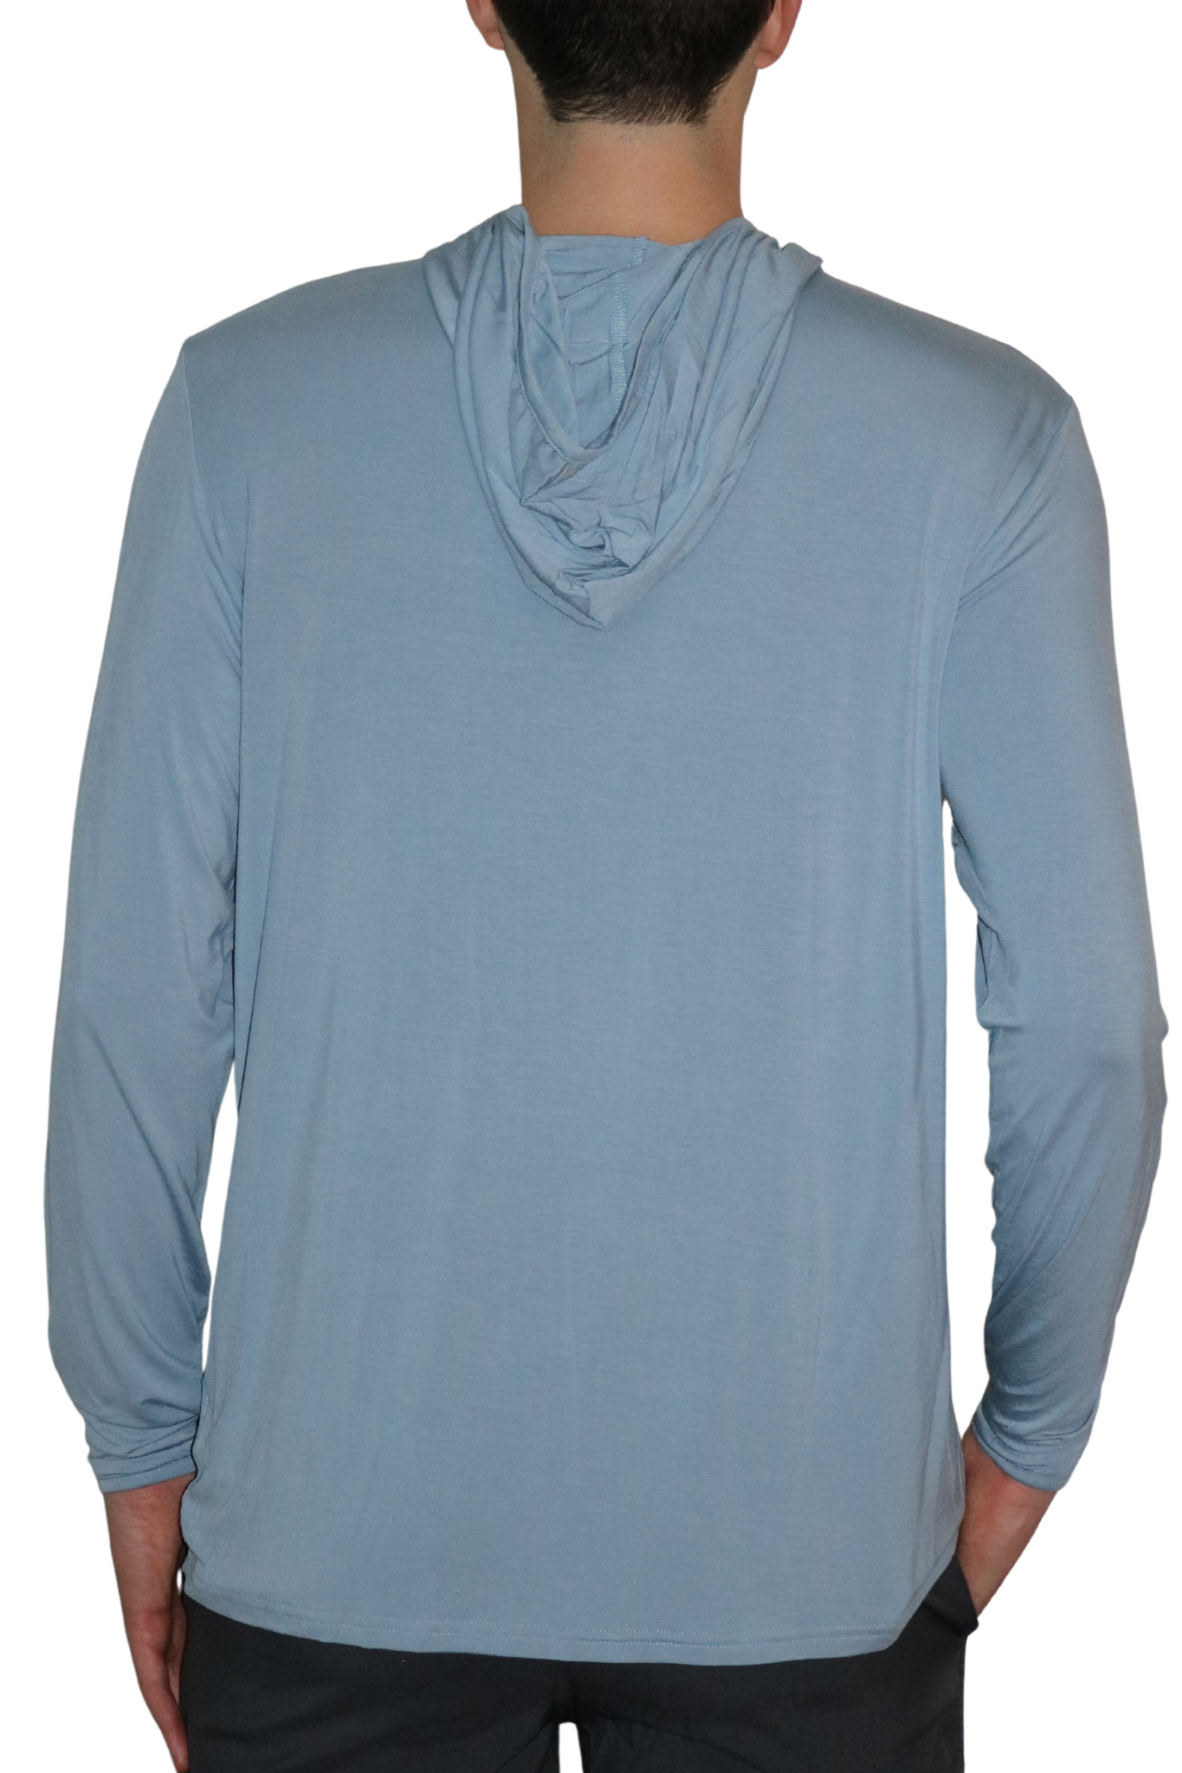 Back of the Angler Crossover Bamboo Hoodie in Light Ocean Blue. This lightweight hoodie provides 35+ UPF sun protection.